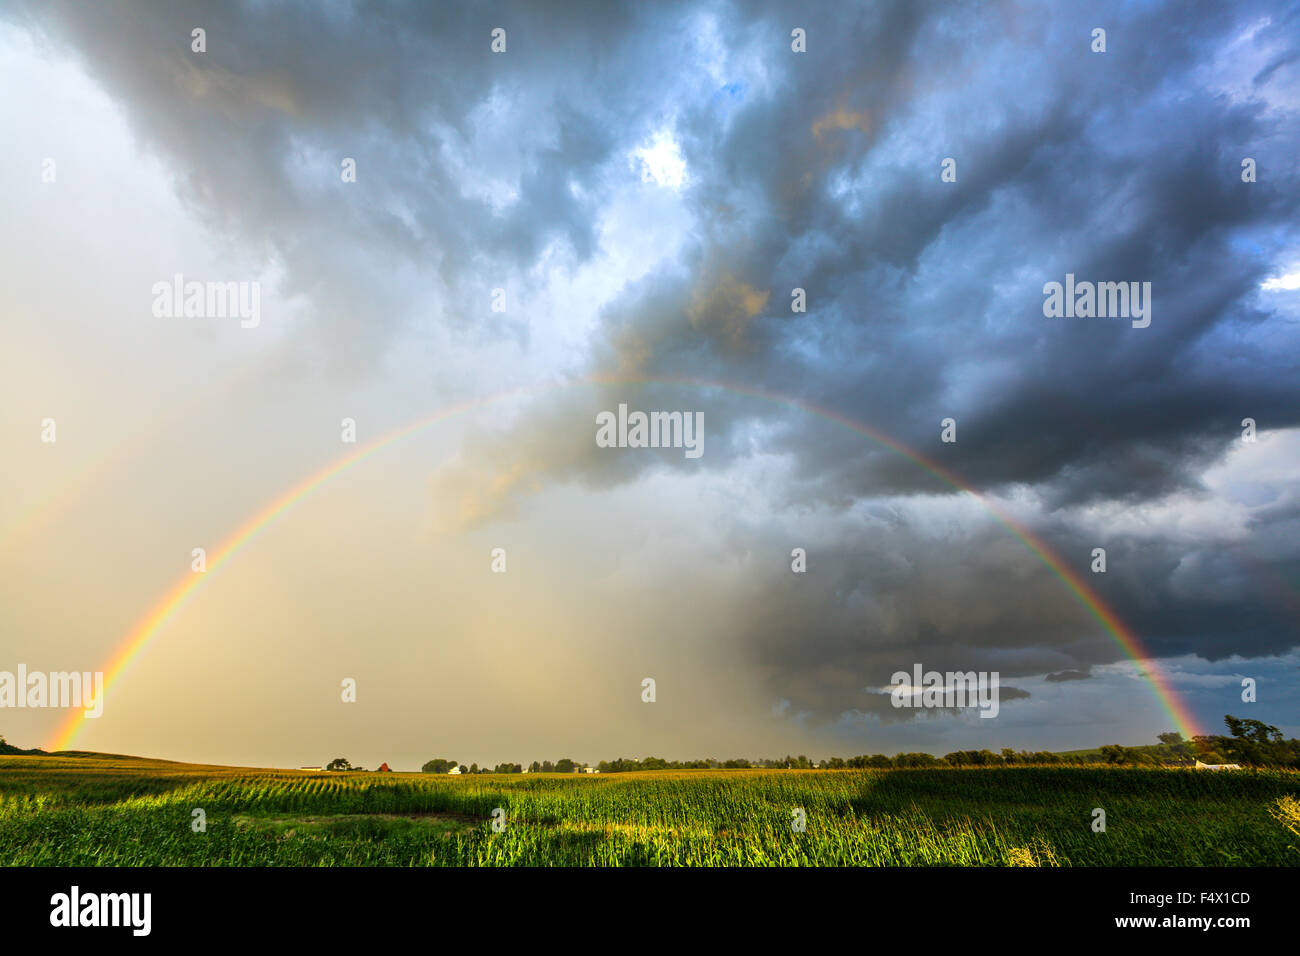 A rainbow follows a thunderstorm in Mohawk Valley. New York State, USA Stock Photo